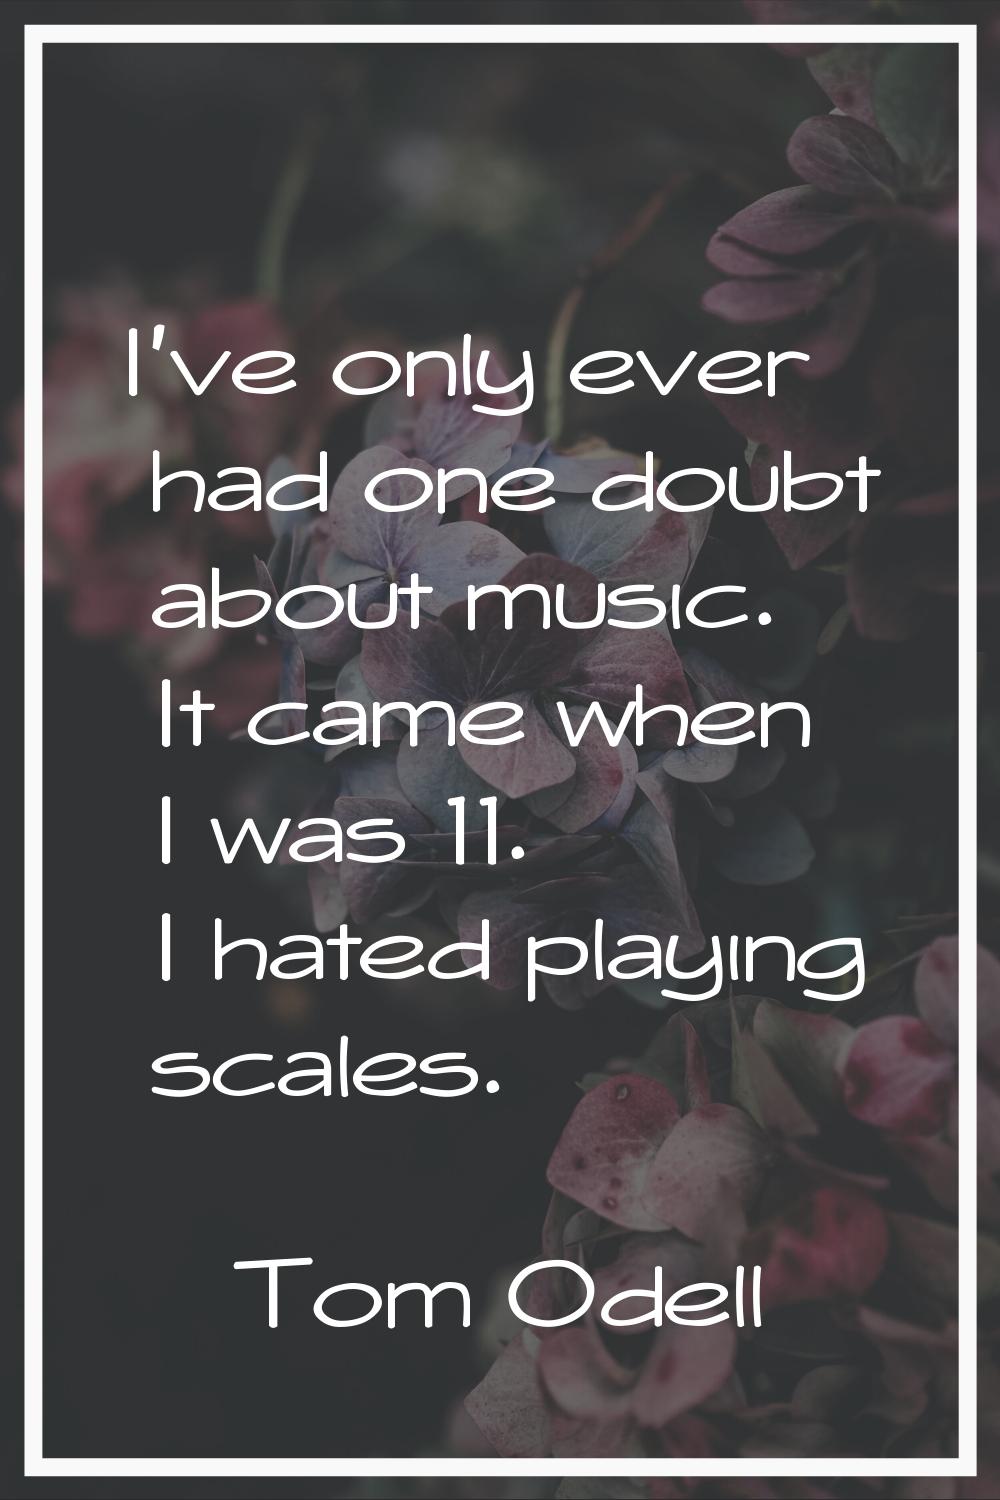 I've only ever had one doubt about music. It came when I was 11. I hated playing scales.